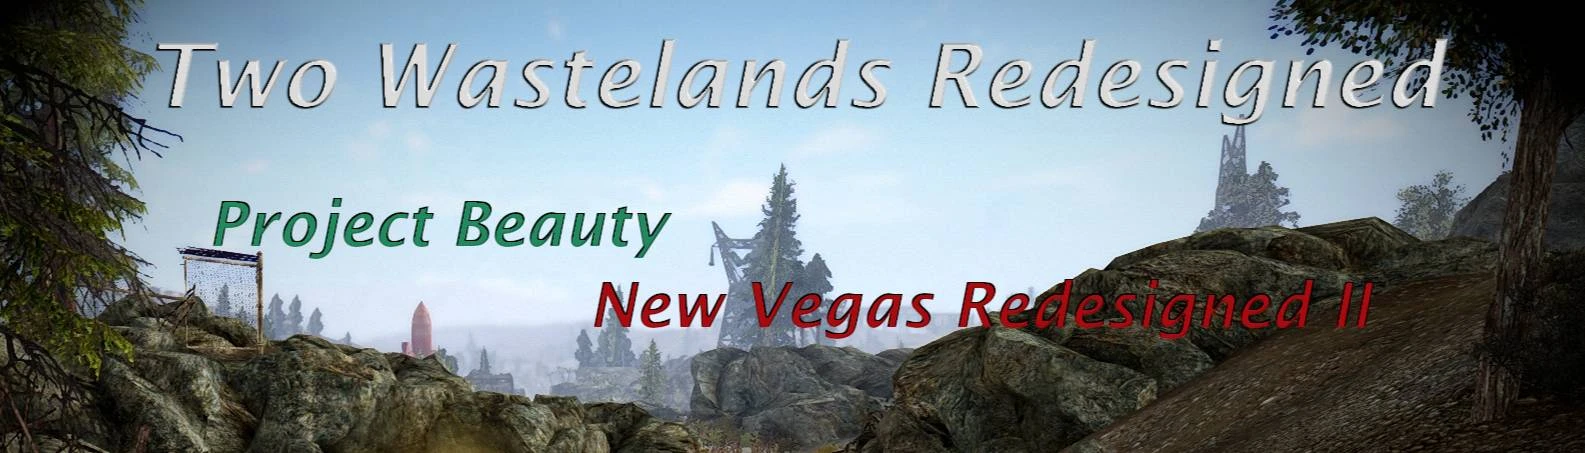 New-Gen Fallout: New Vegas Remake Is A Thing Of Beauty